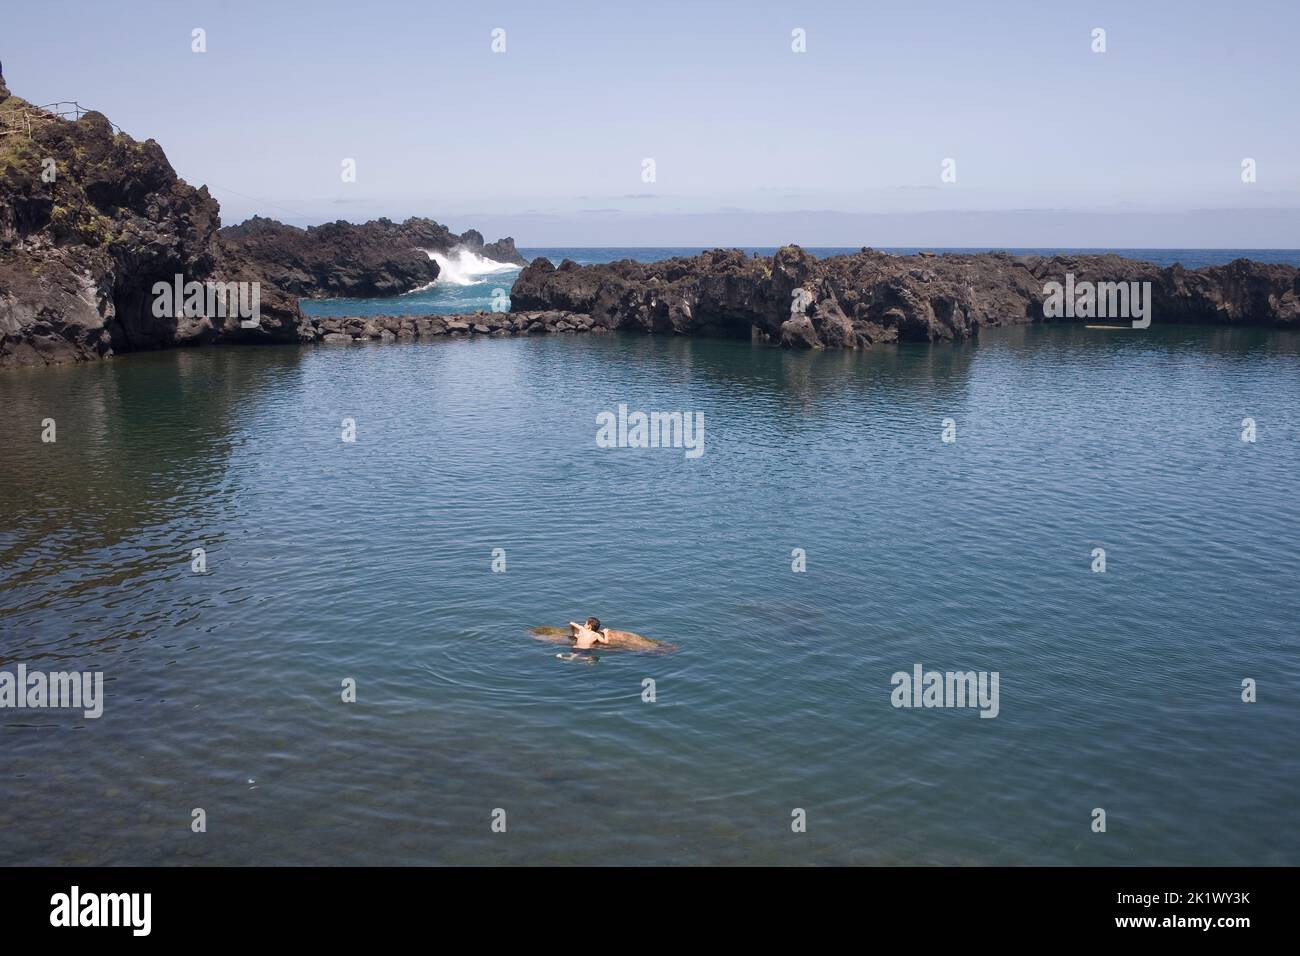 Natural pool at Seixal on the North coast of Madeira with boy holding on to wooden log Stock Photo